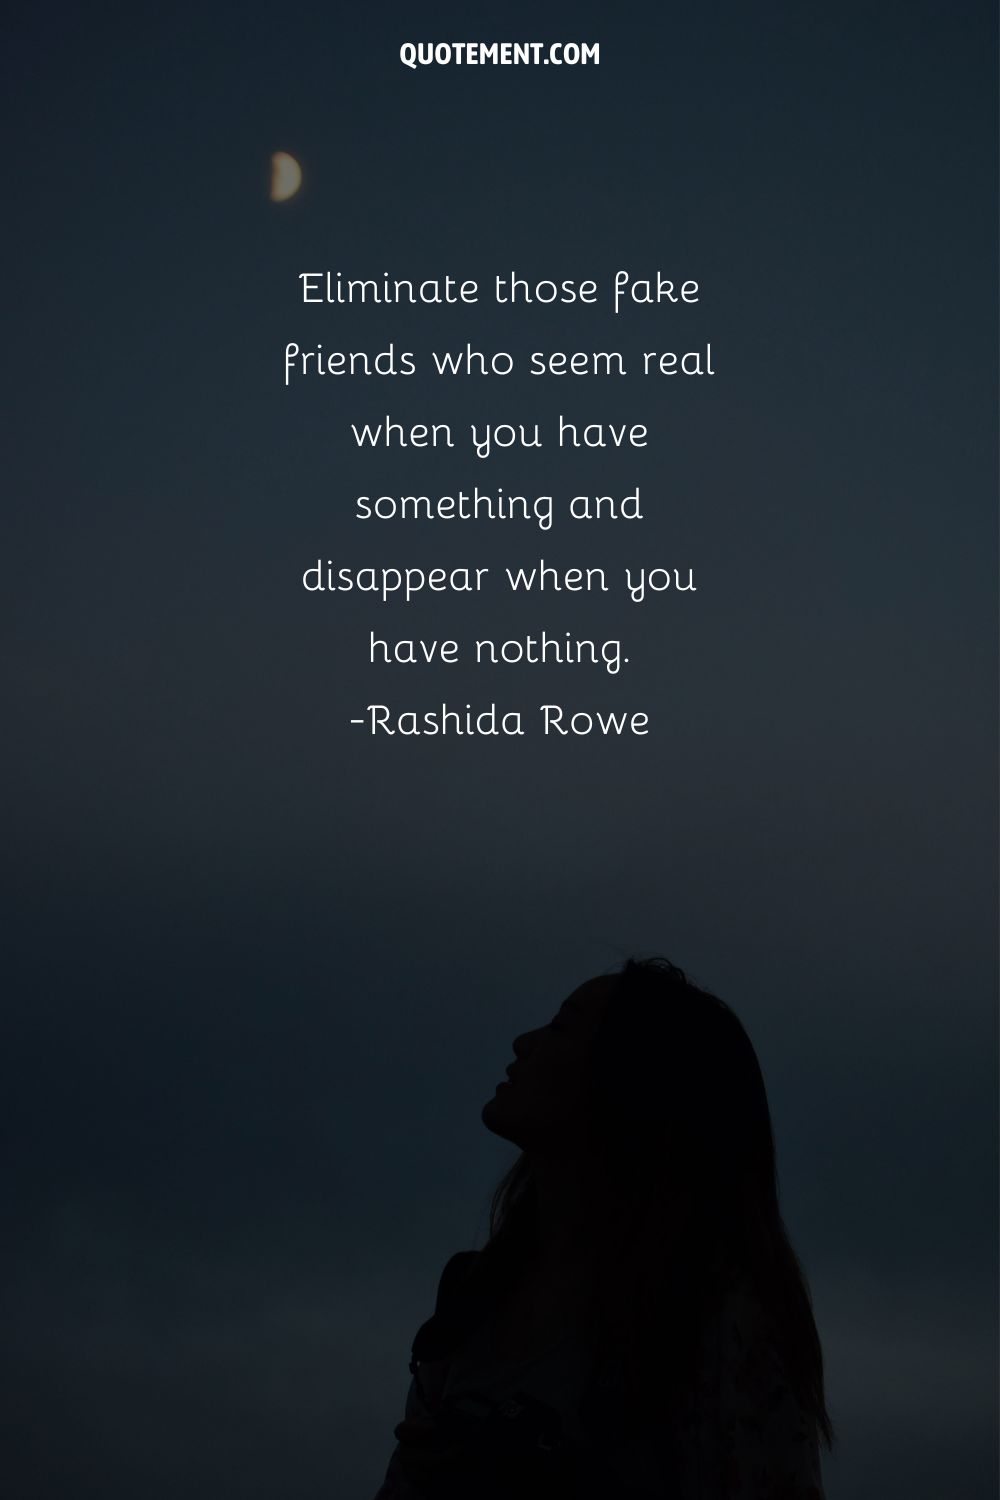 Eliminate those fake friends who seem real when you have something and disappear when you have nothing